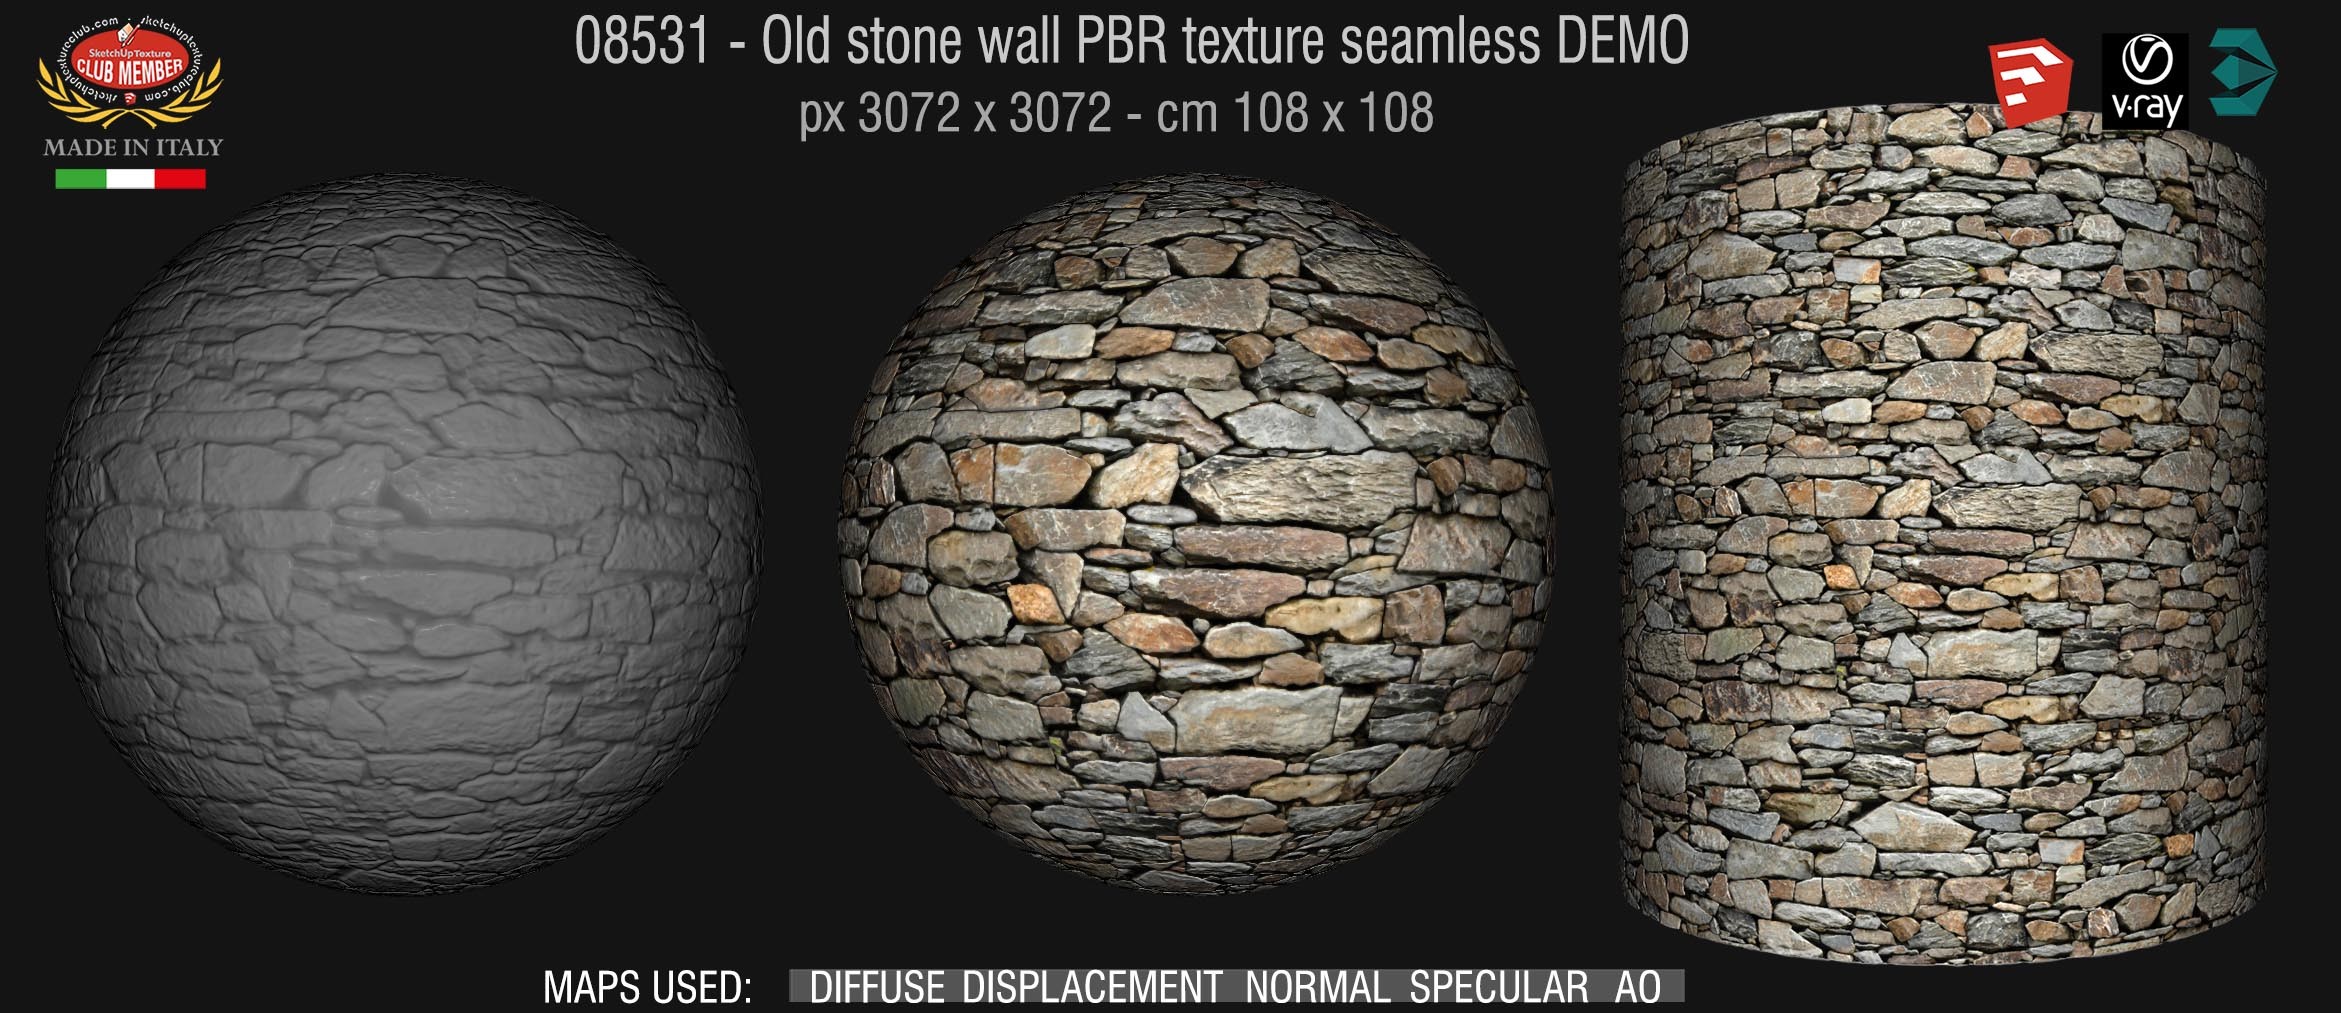 08531 Old stone wall PBR texture seamless DEMO